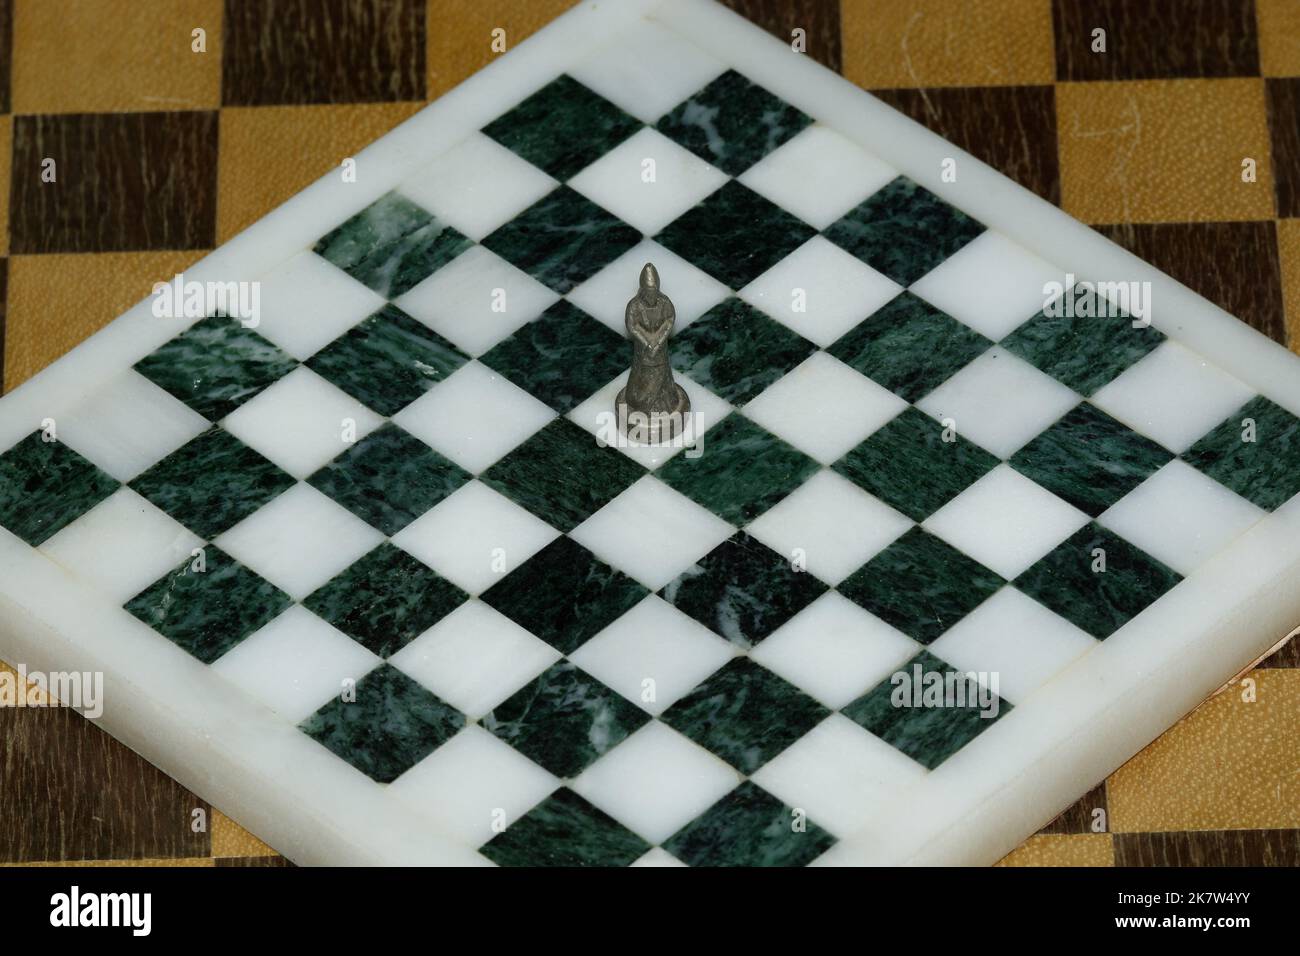 Lone Queen standing the centre of a black and white marble chess board. No other pieces are present. Wonderful sense of solitude or abandonment. Stock Photo